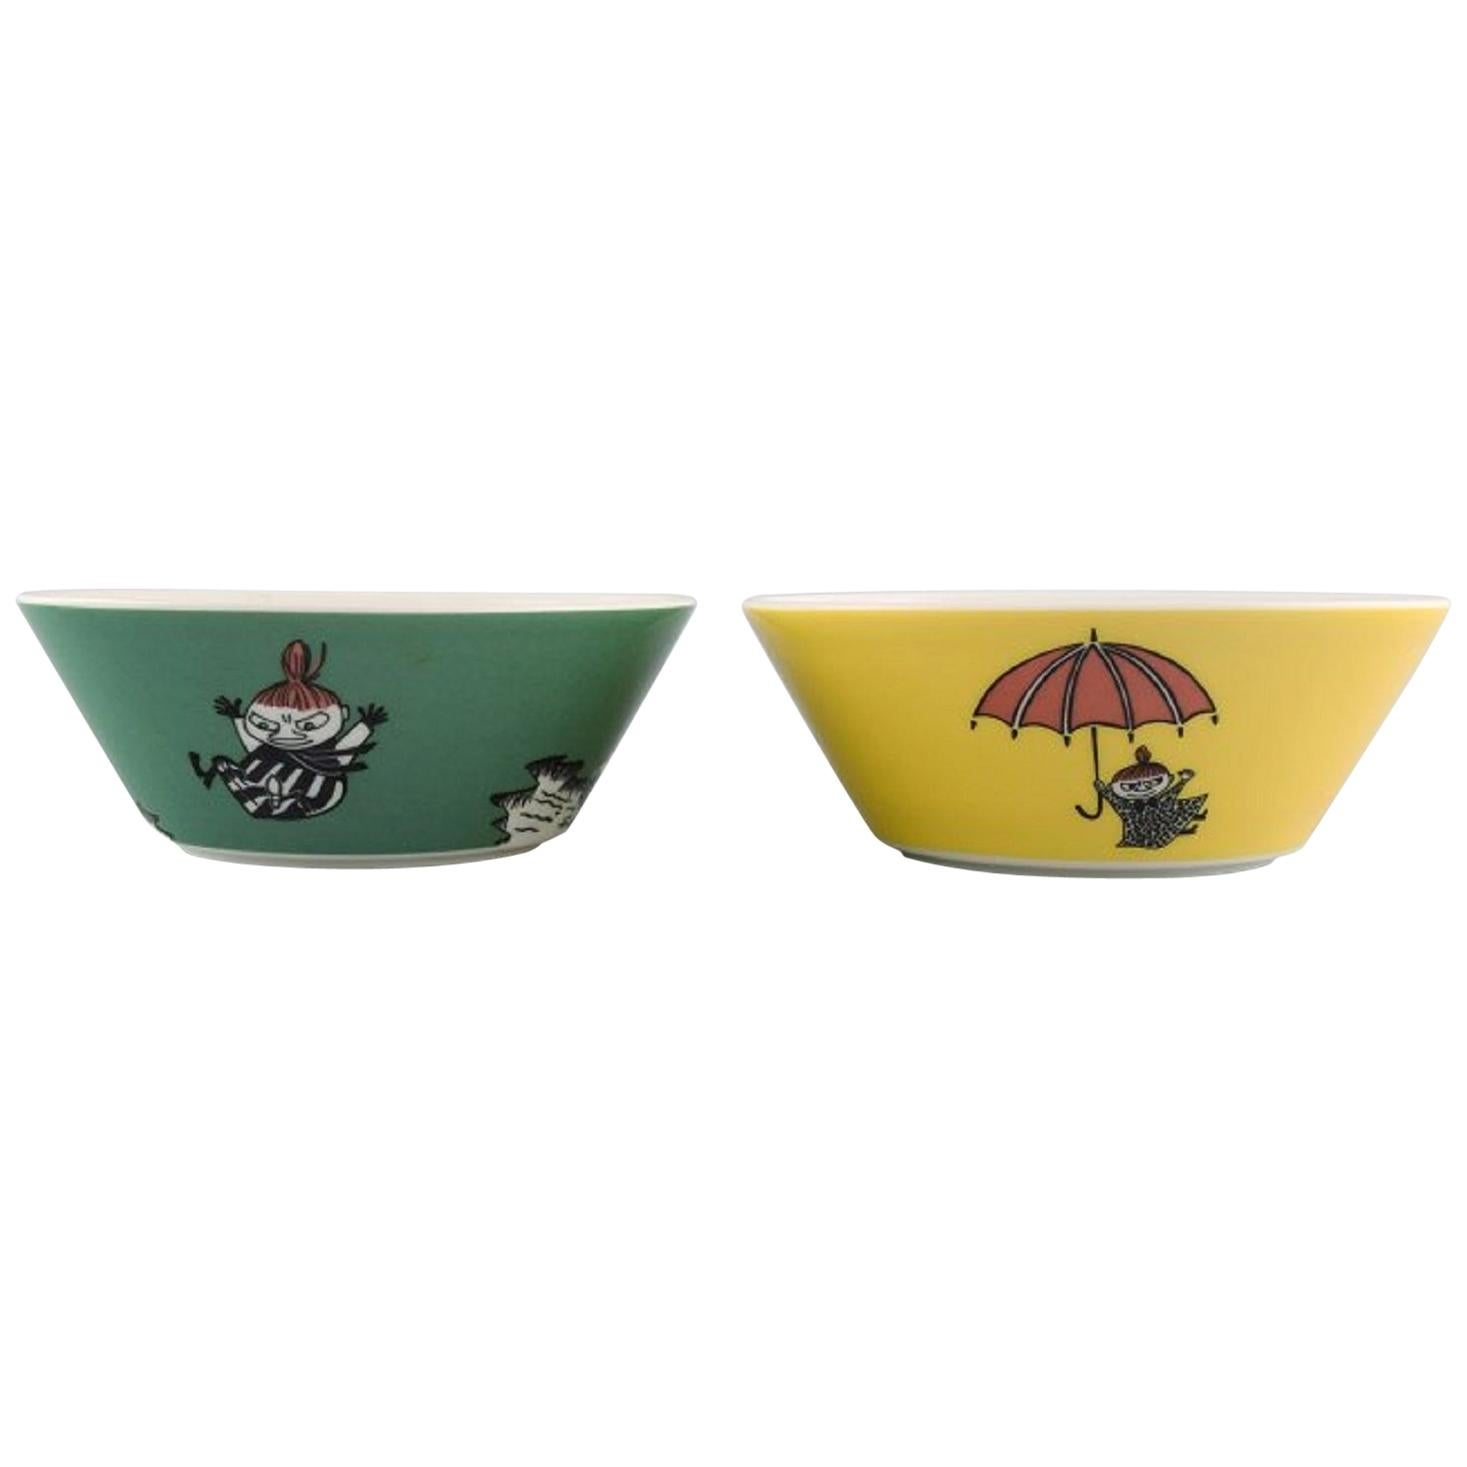 Arabia, Finland, Two Porcelain Bowls with Motifs from "Moomin" For Sale